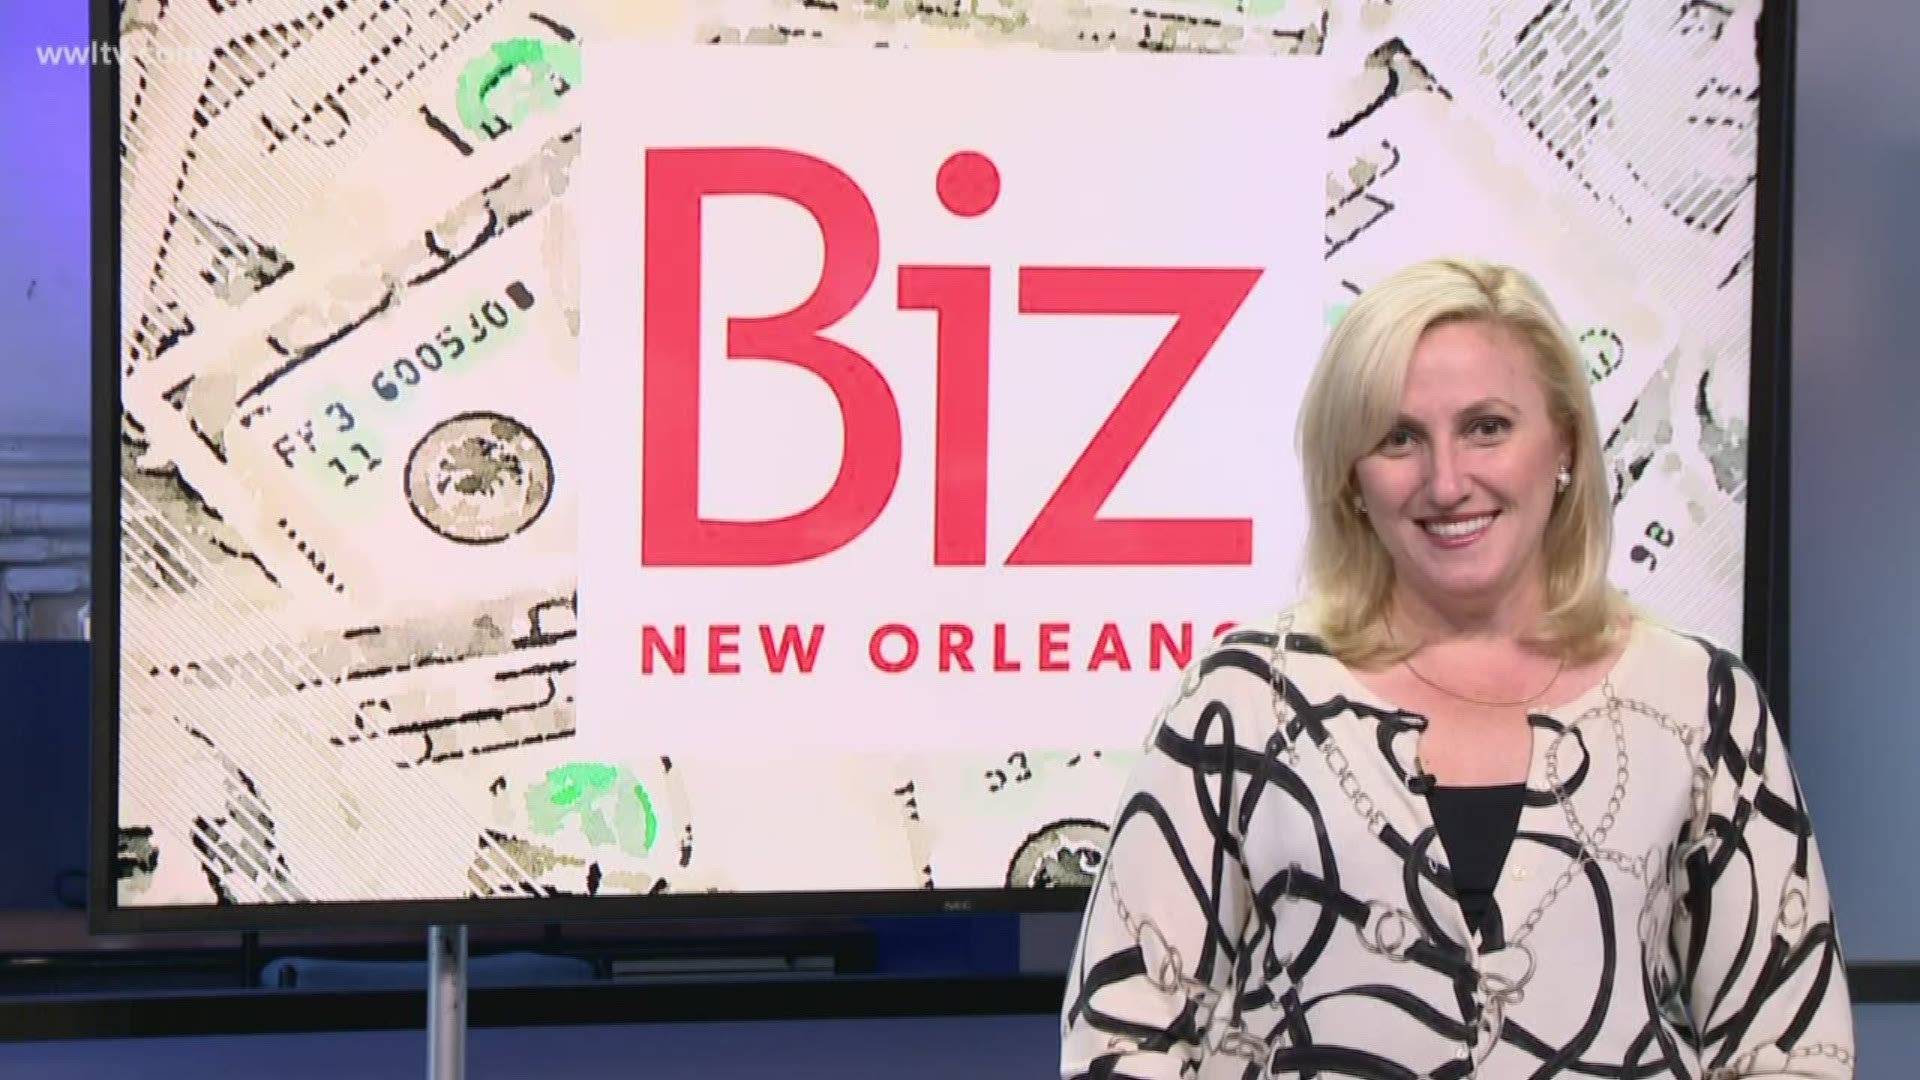 Activities that are common in the summer, like getting married, working a part-time summer job or volunteering, often qualify for tax credits or deductions. BizNewOrleans.com's Leslie Snadowsky says even if you may not earn enough this summer to owe federal income tax, you should remember to file a return to get a refund for taxes withheld early next year.